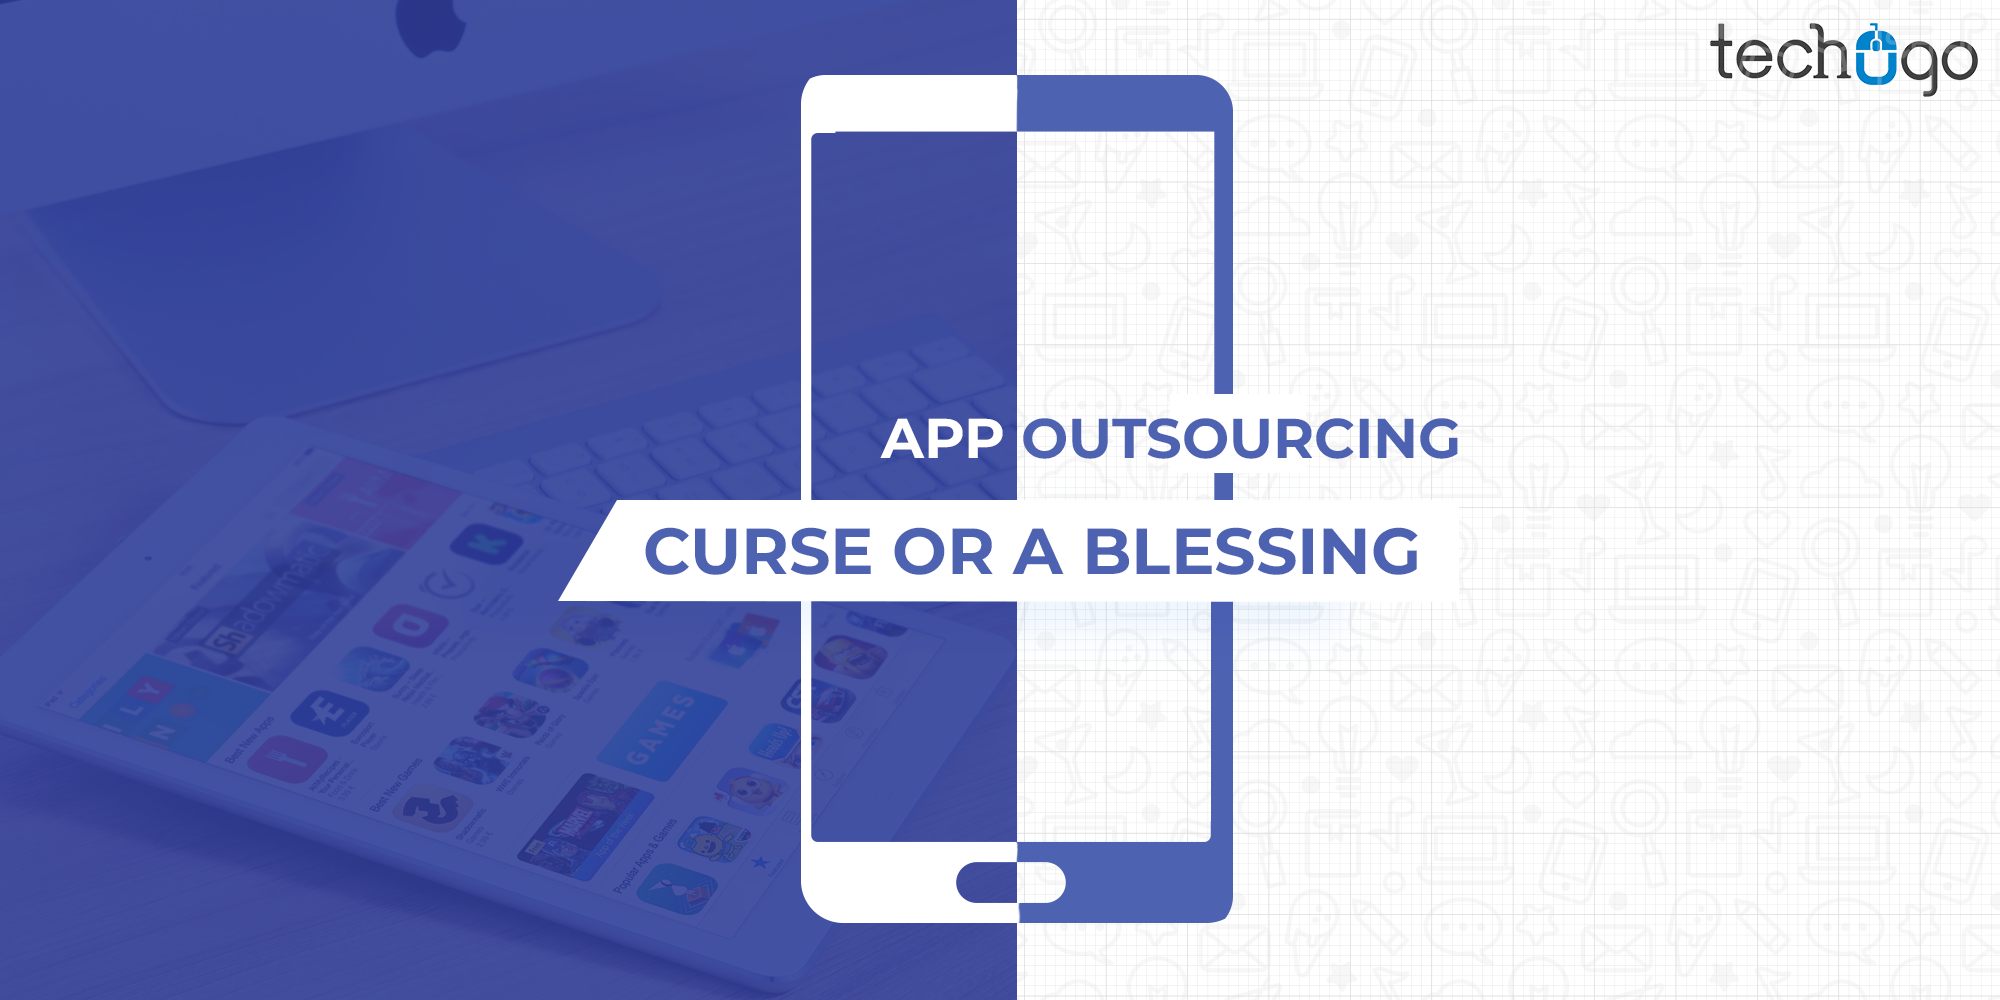 App Outsourcing: Curse Or A Blessing